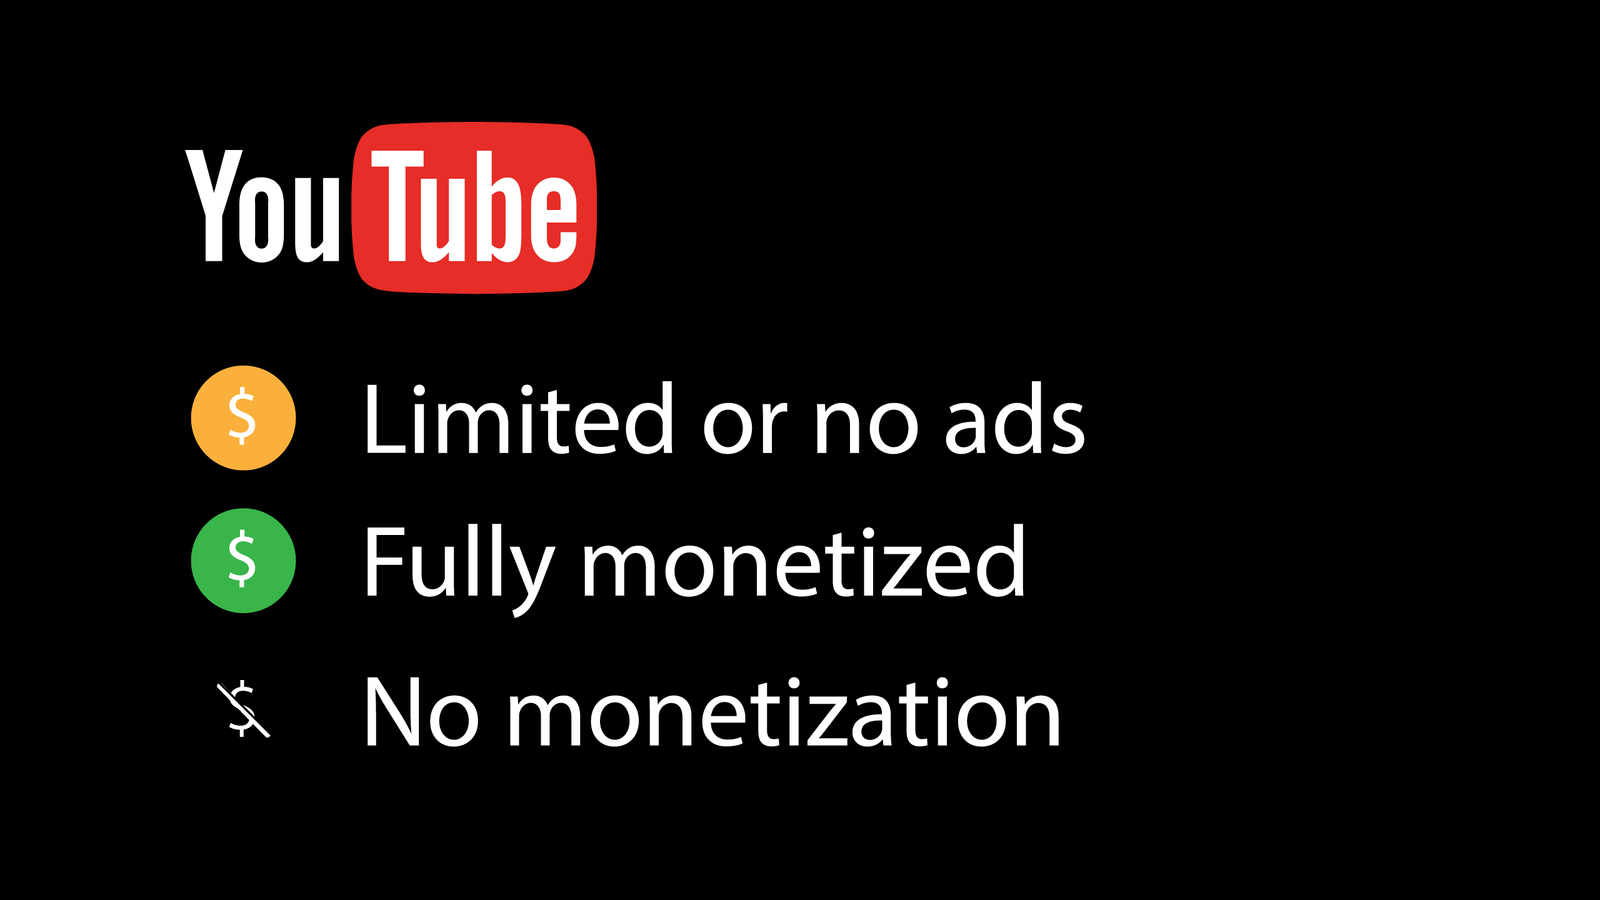 YouTube Limited or no ads